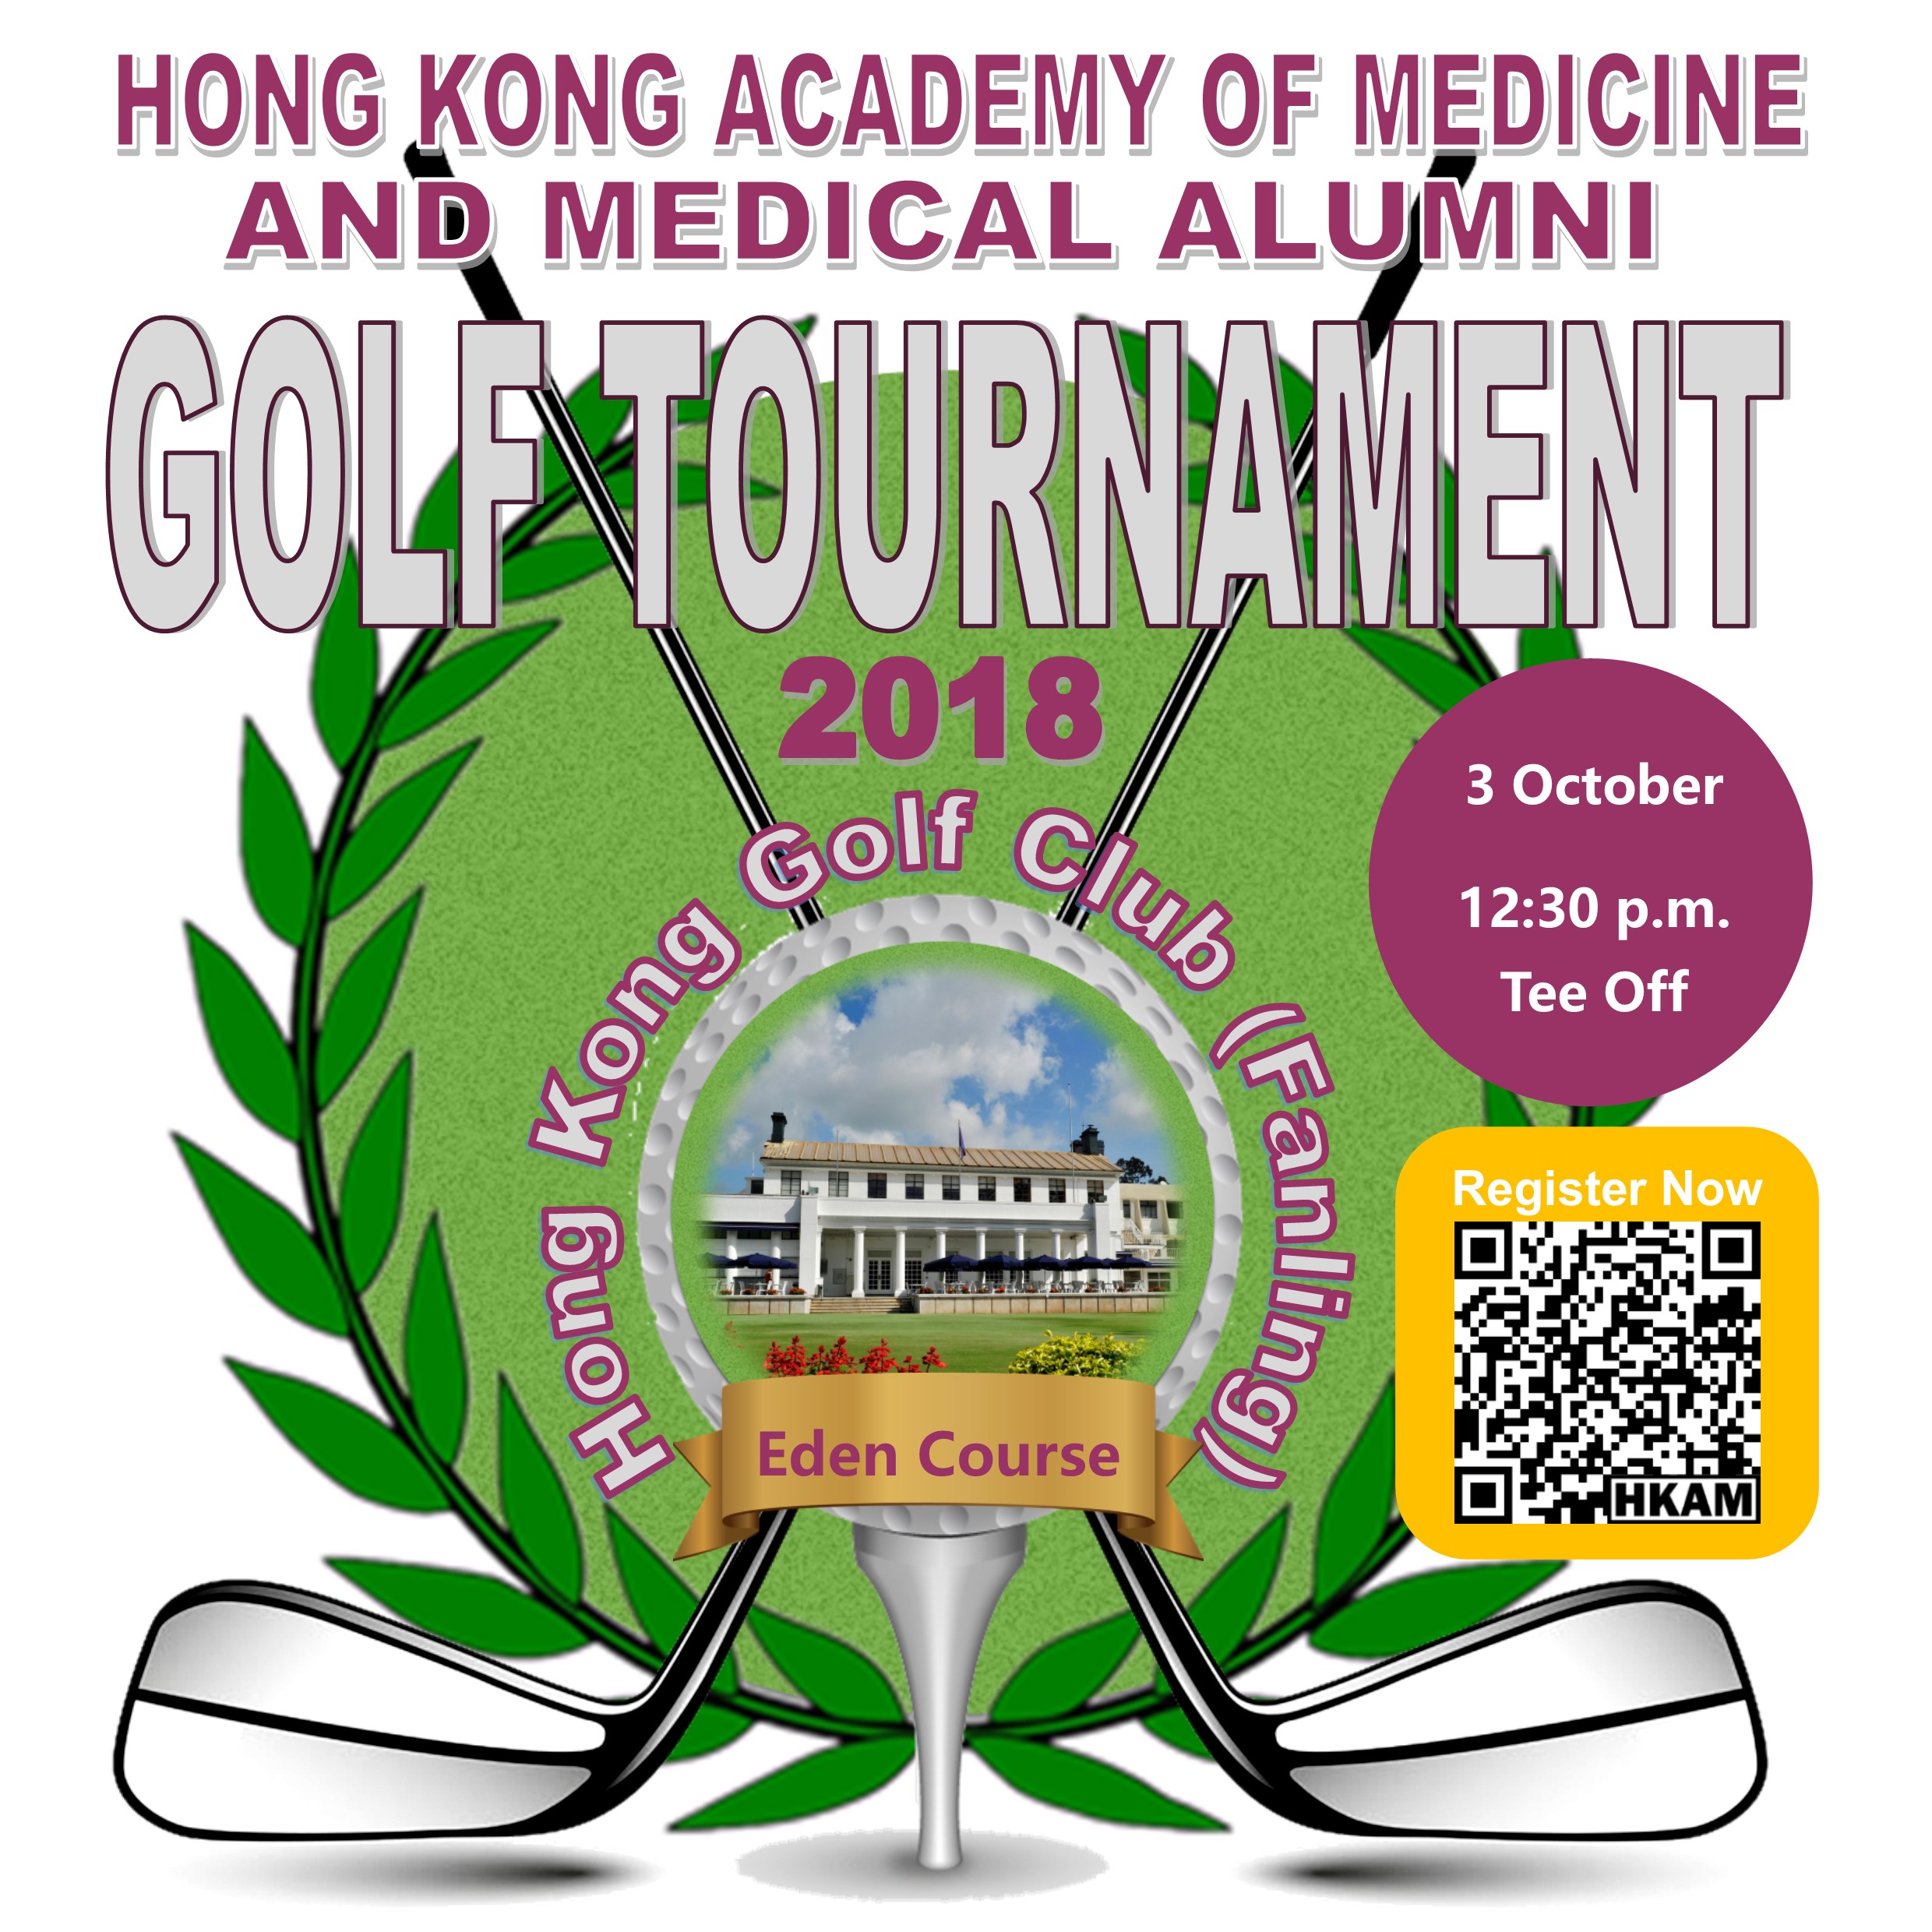 Registration is Now Open for the 2018 Hong Kong Academy of Medicine and Medical Alumni Golf Tournament